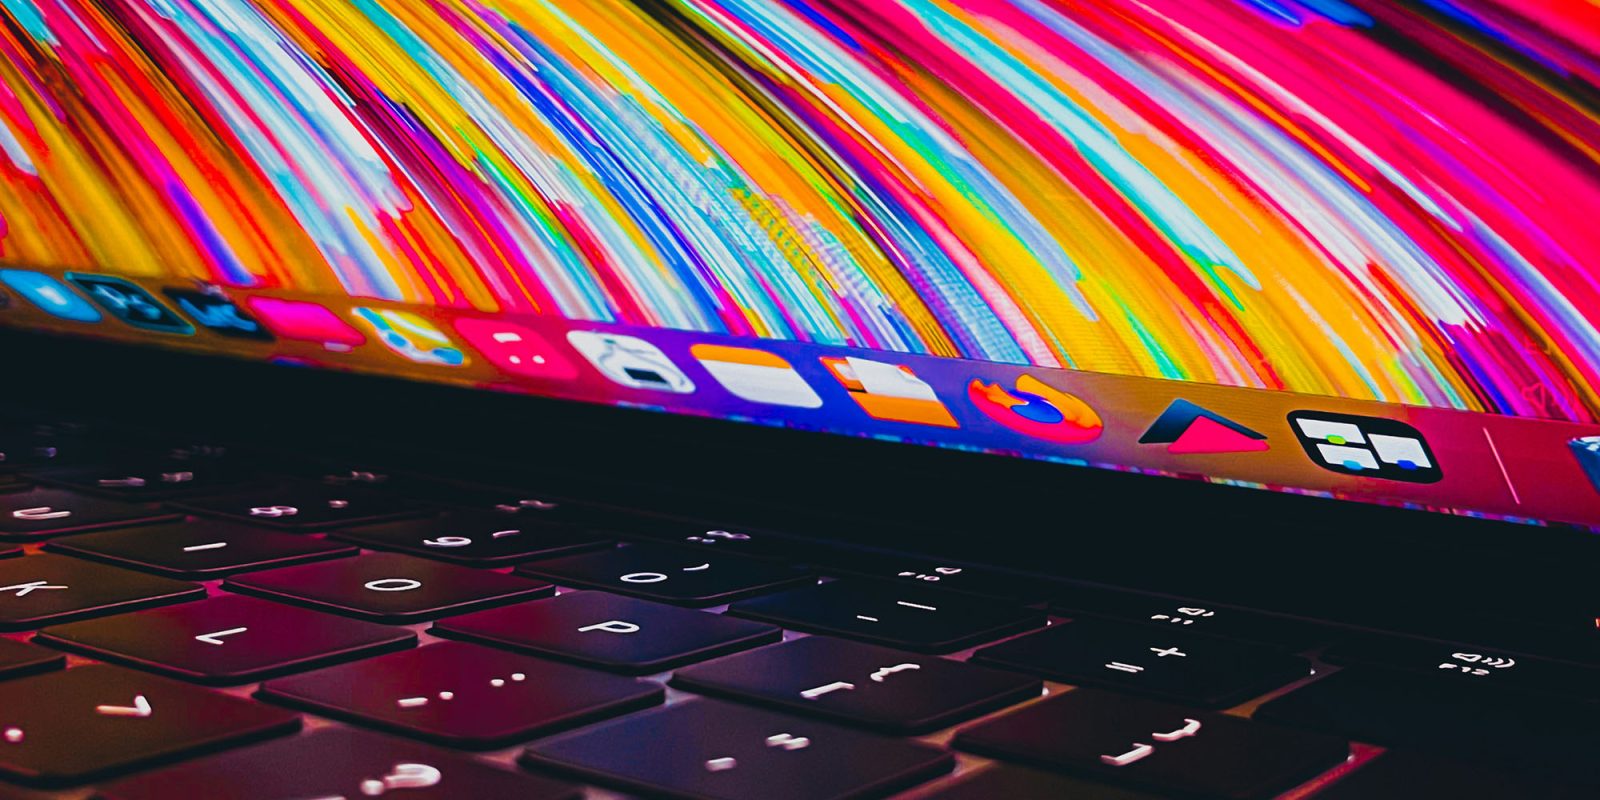 Unpatchable security flaw in Apple Silicon Macs | MacBook with chaotic colorful wallpaper